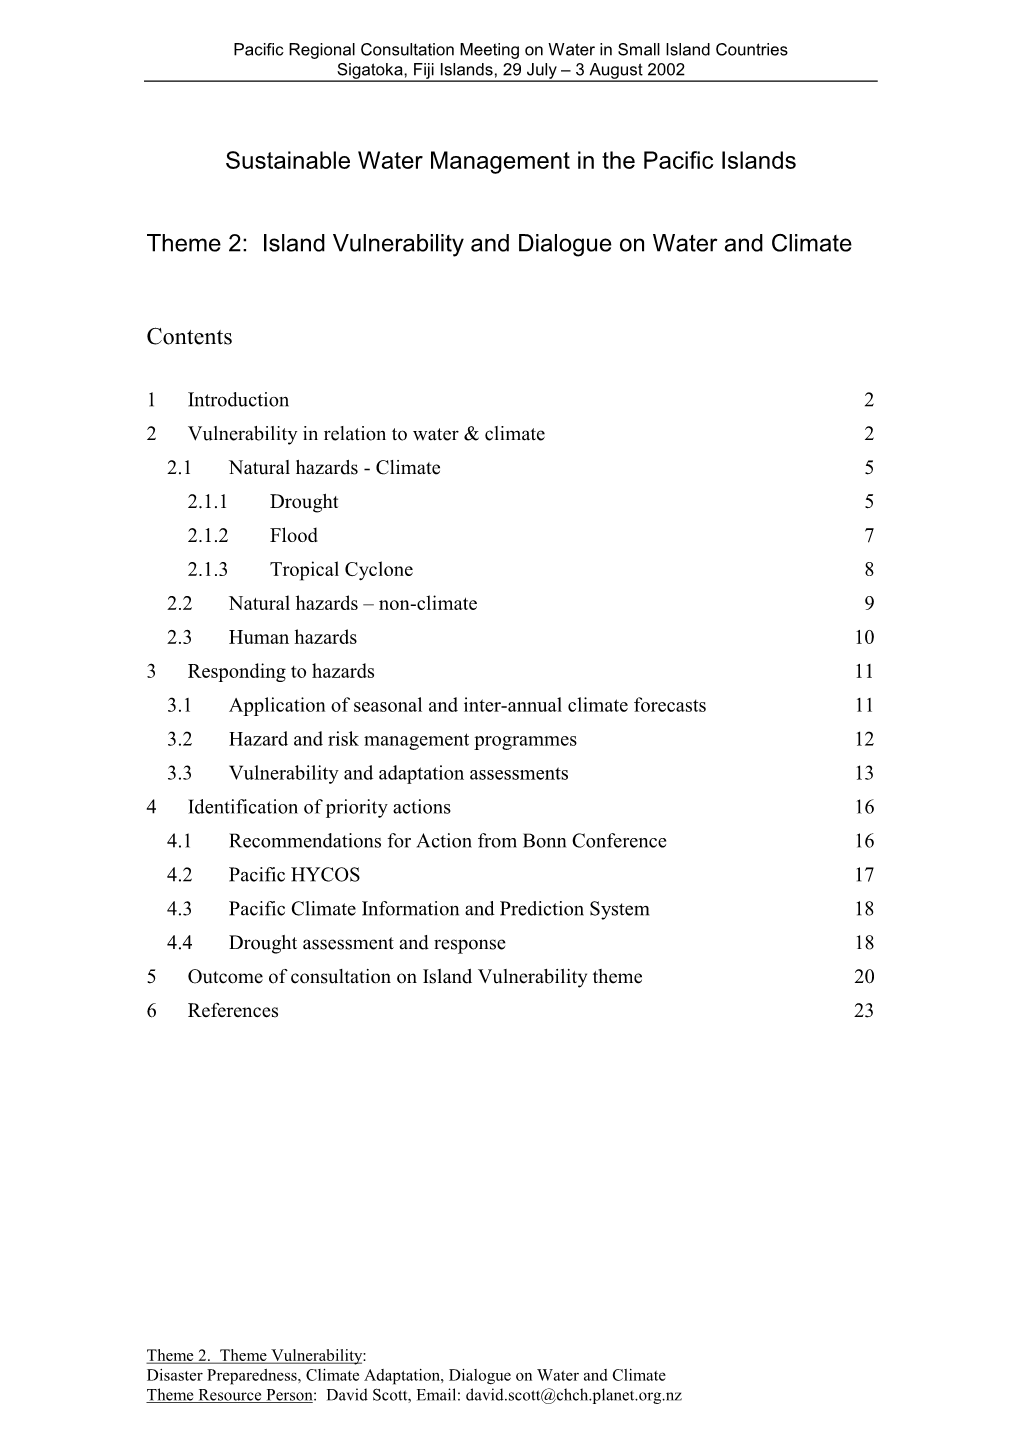 Theme 2: Island Vulnerability and Dialogue on Water and Climate